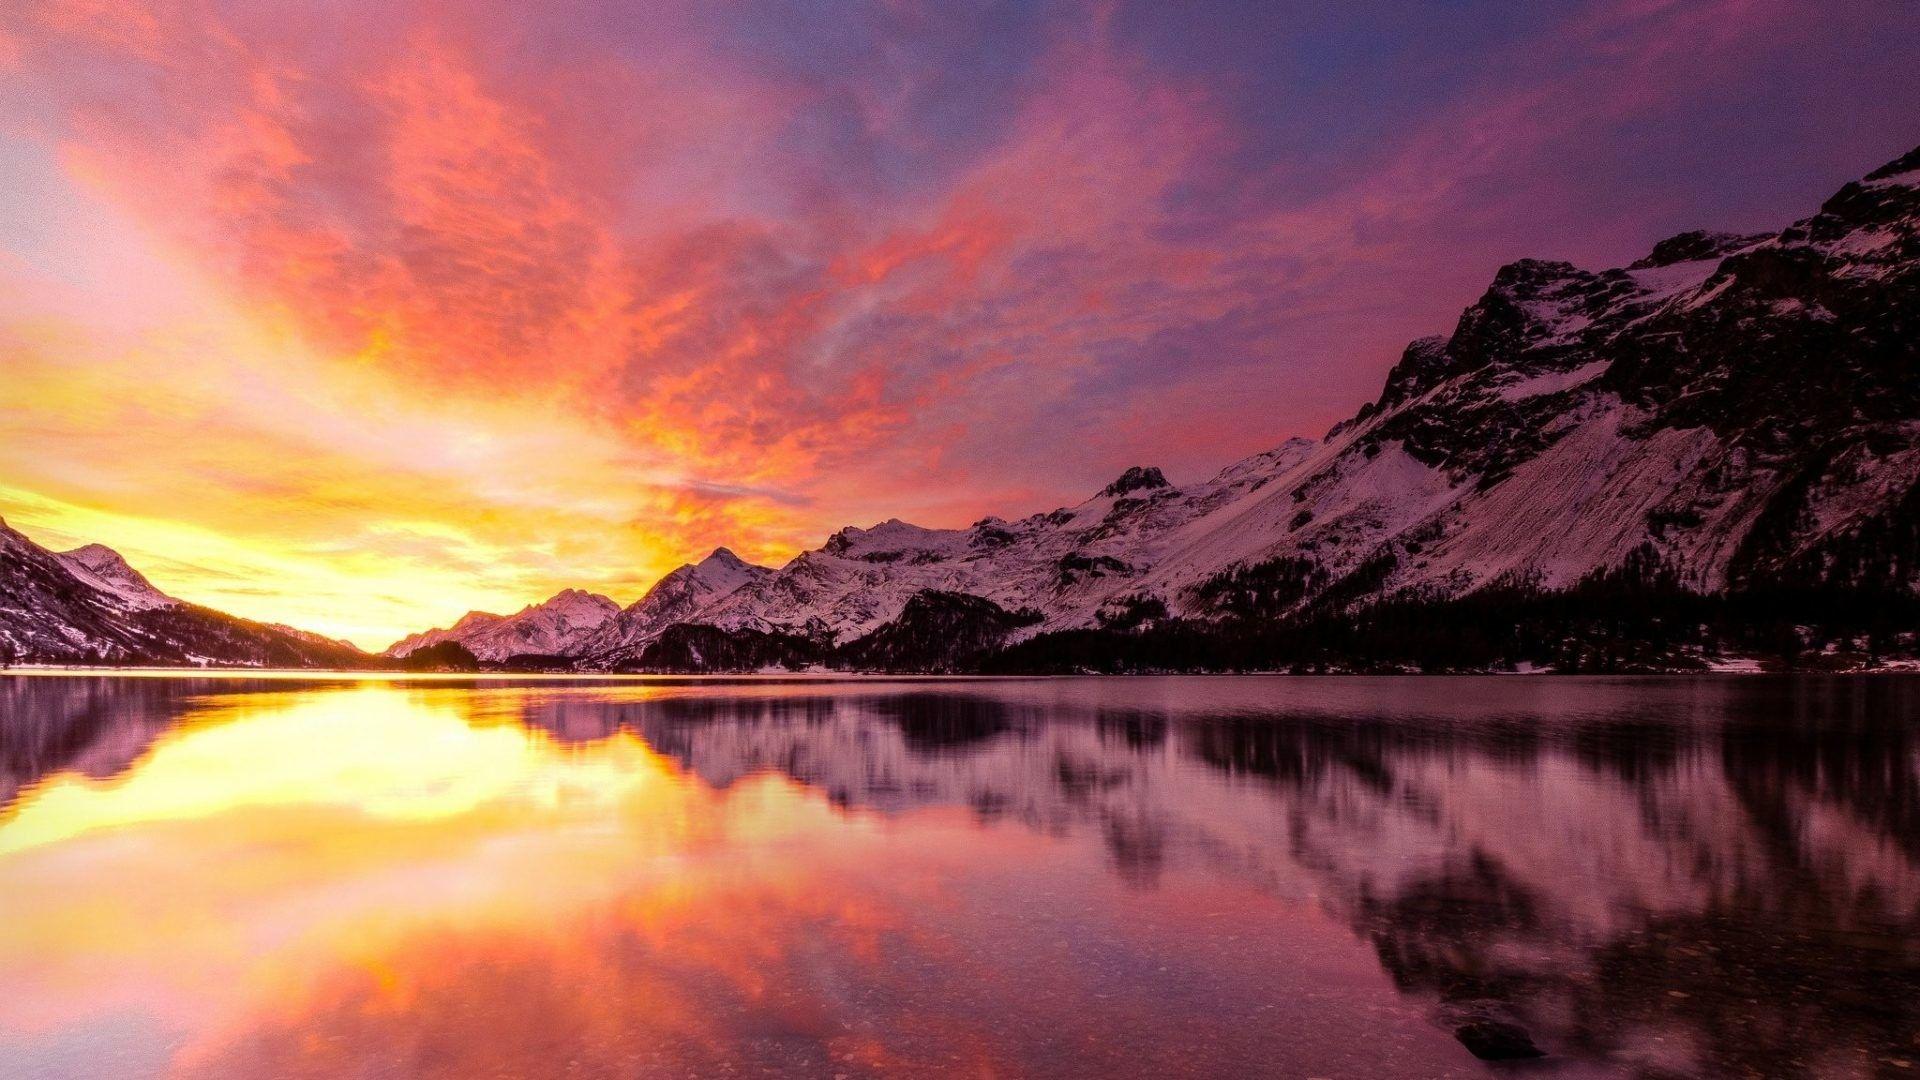 Winter Mountain Sunset Wallpapers - Top Free Winter Mountain Sunset